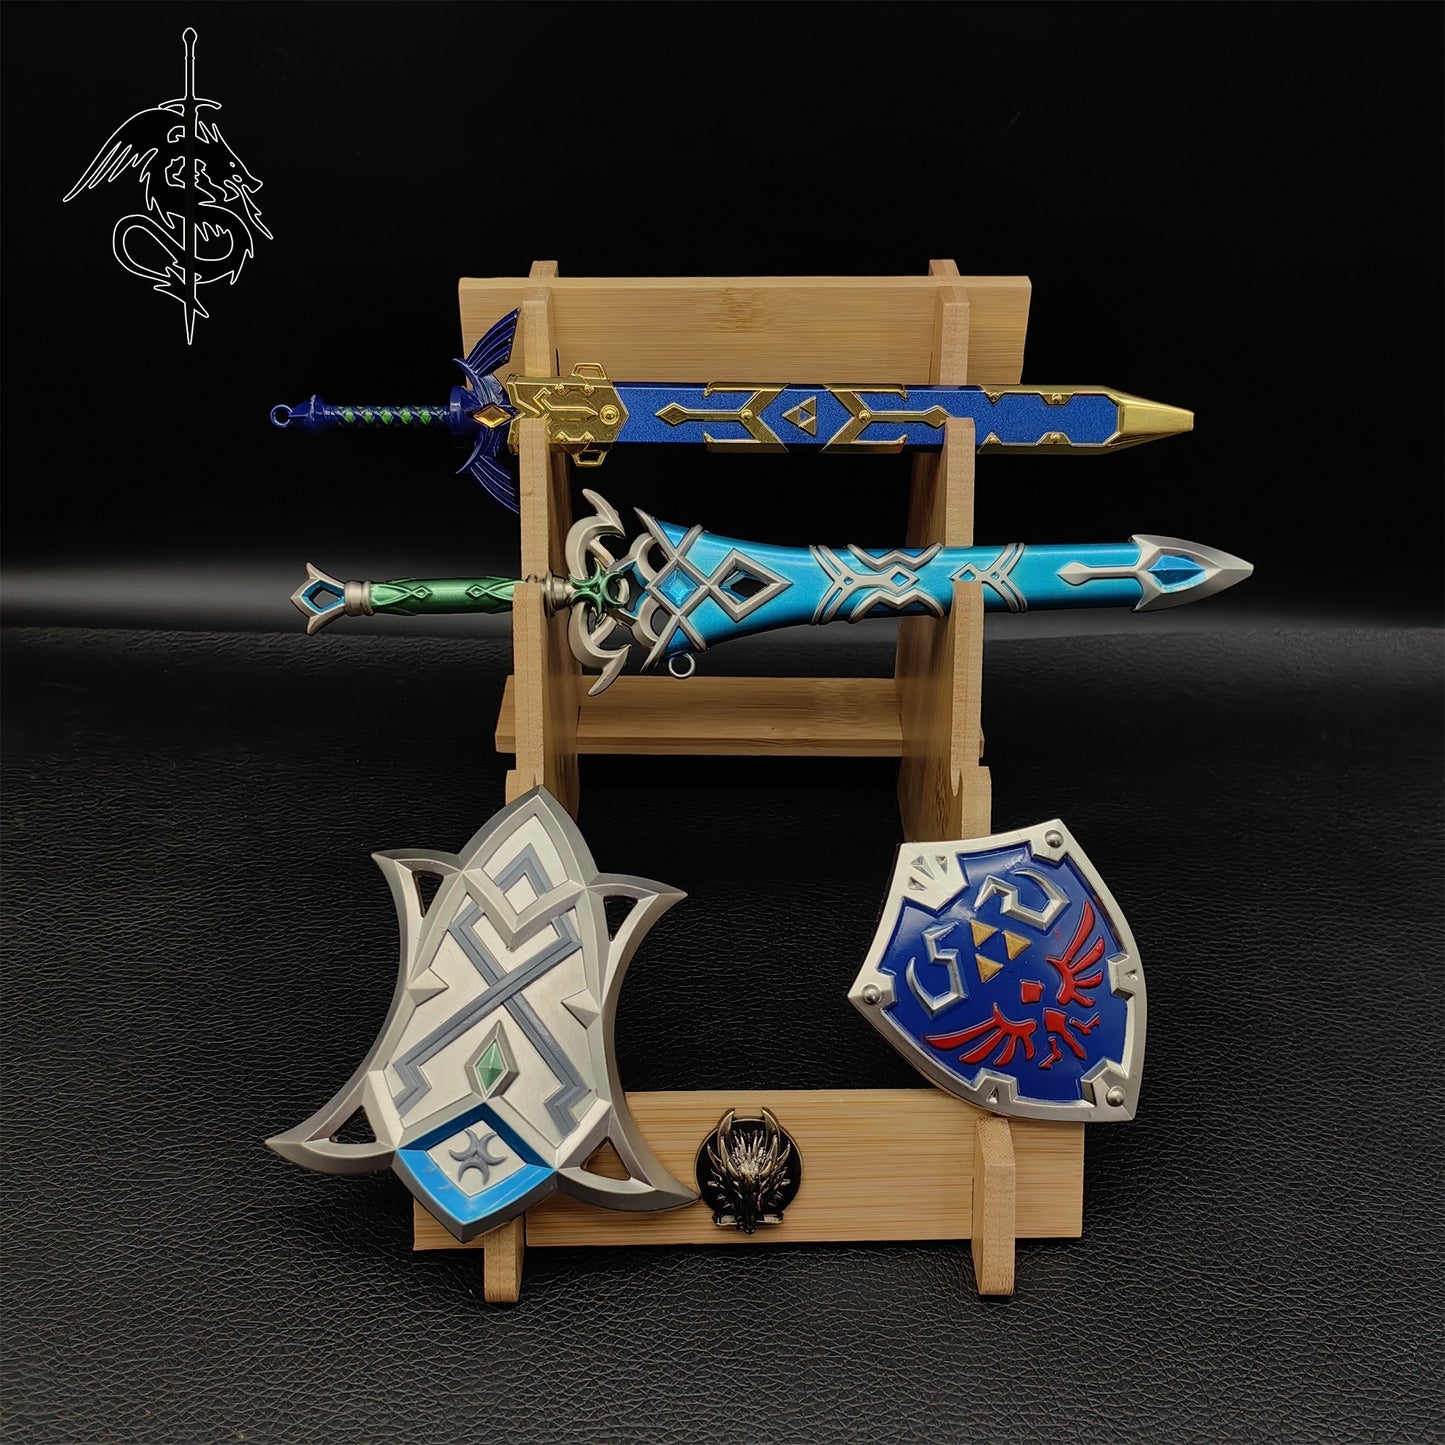 Top Rank Link Sword And Shield 4 in 1 Gift Box